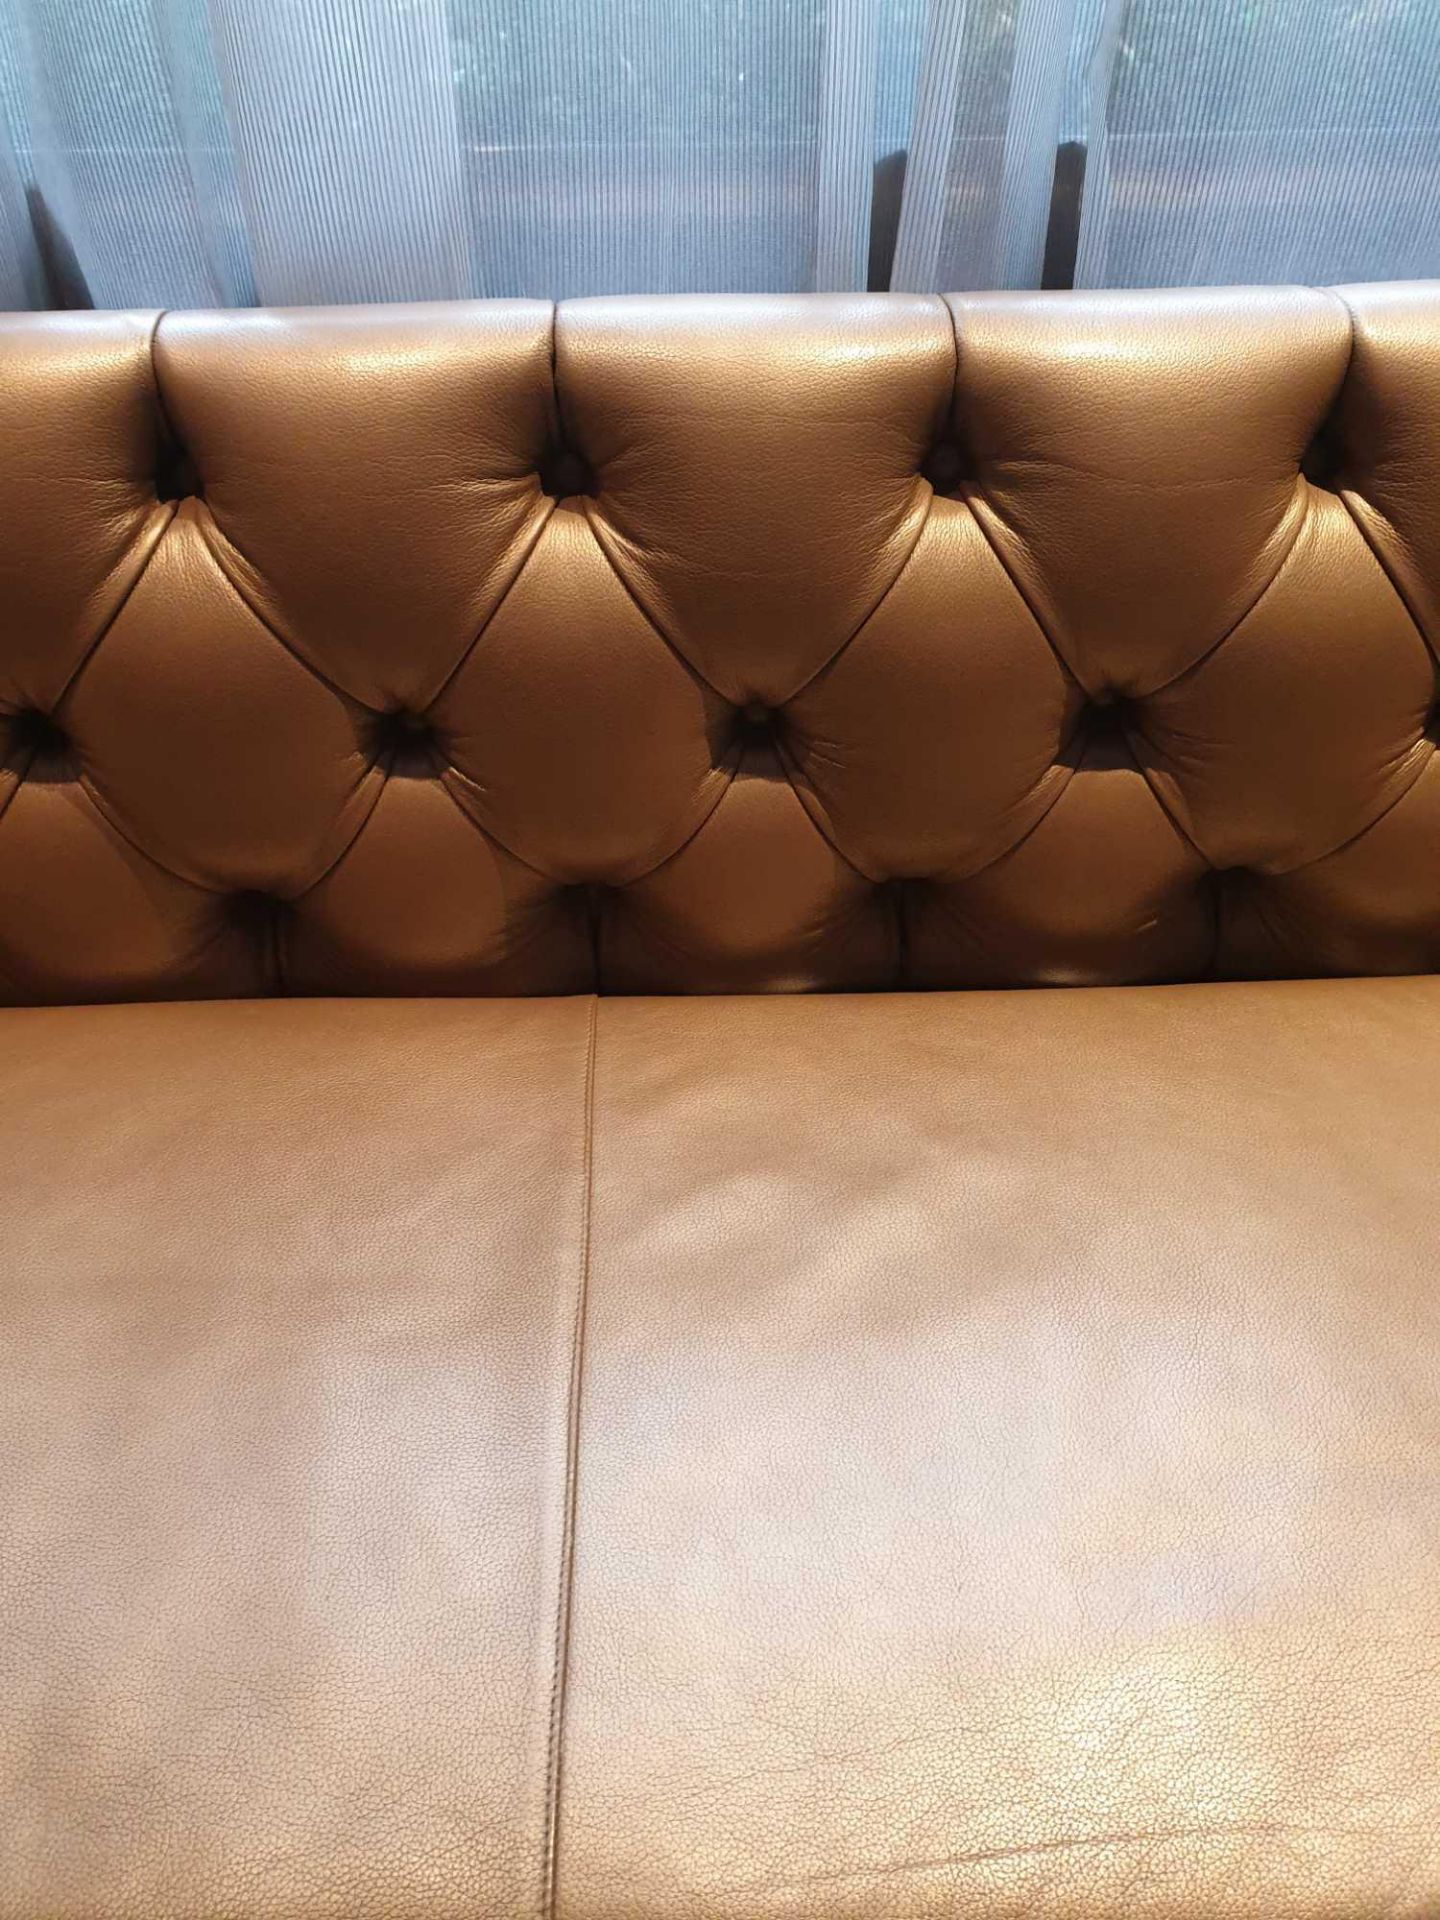 Edelman Leathers Banquet Seating In Gold Leather With Tufted Button Back Rest 272x 47x 40cm And 298x - Image 2 of 2